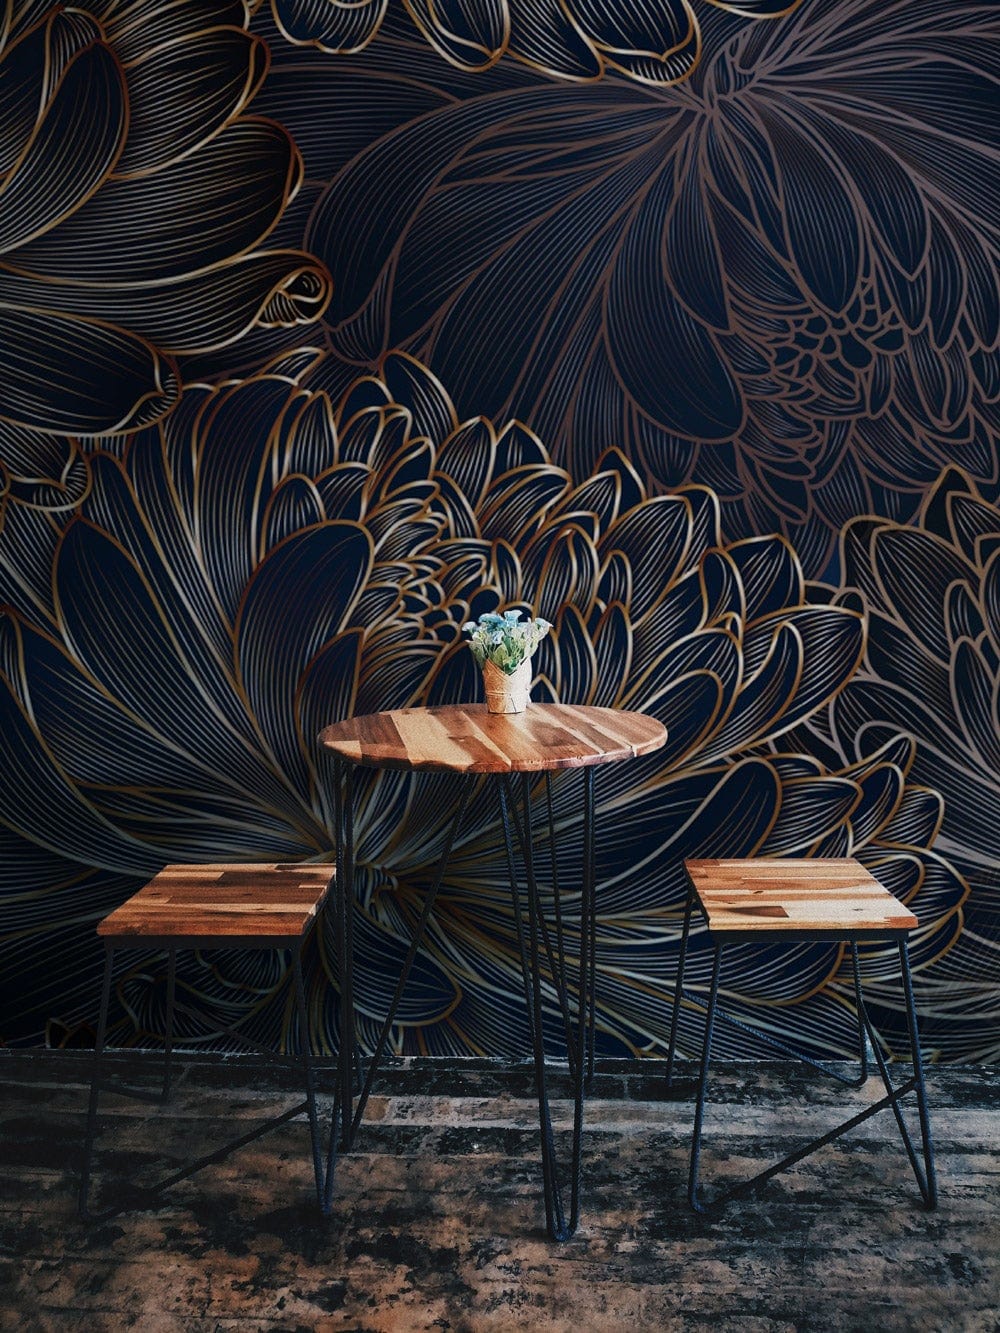 3D wallpaper mural featuring a dark flower design, perfect for decorating the dining room.